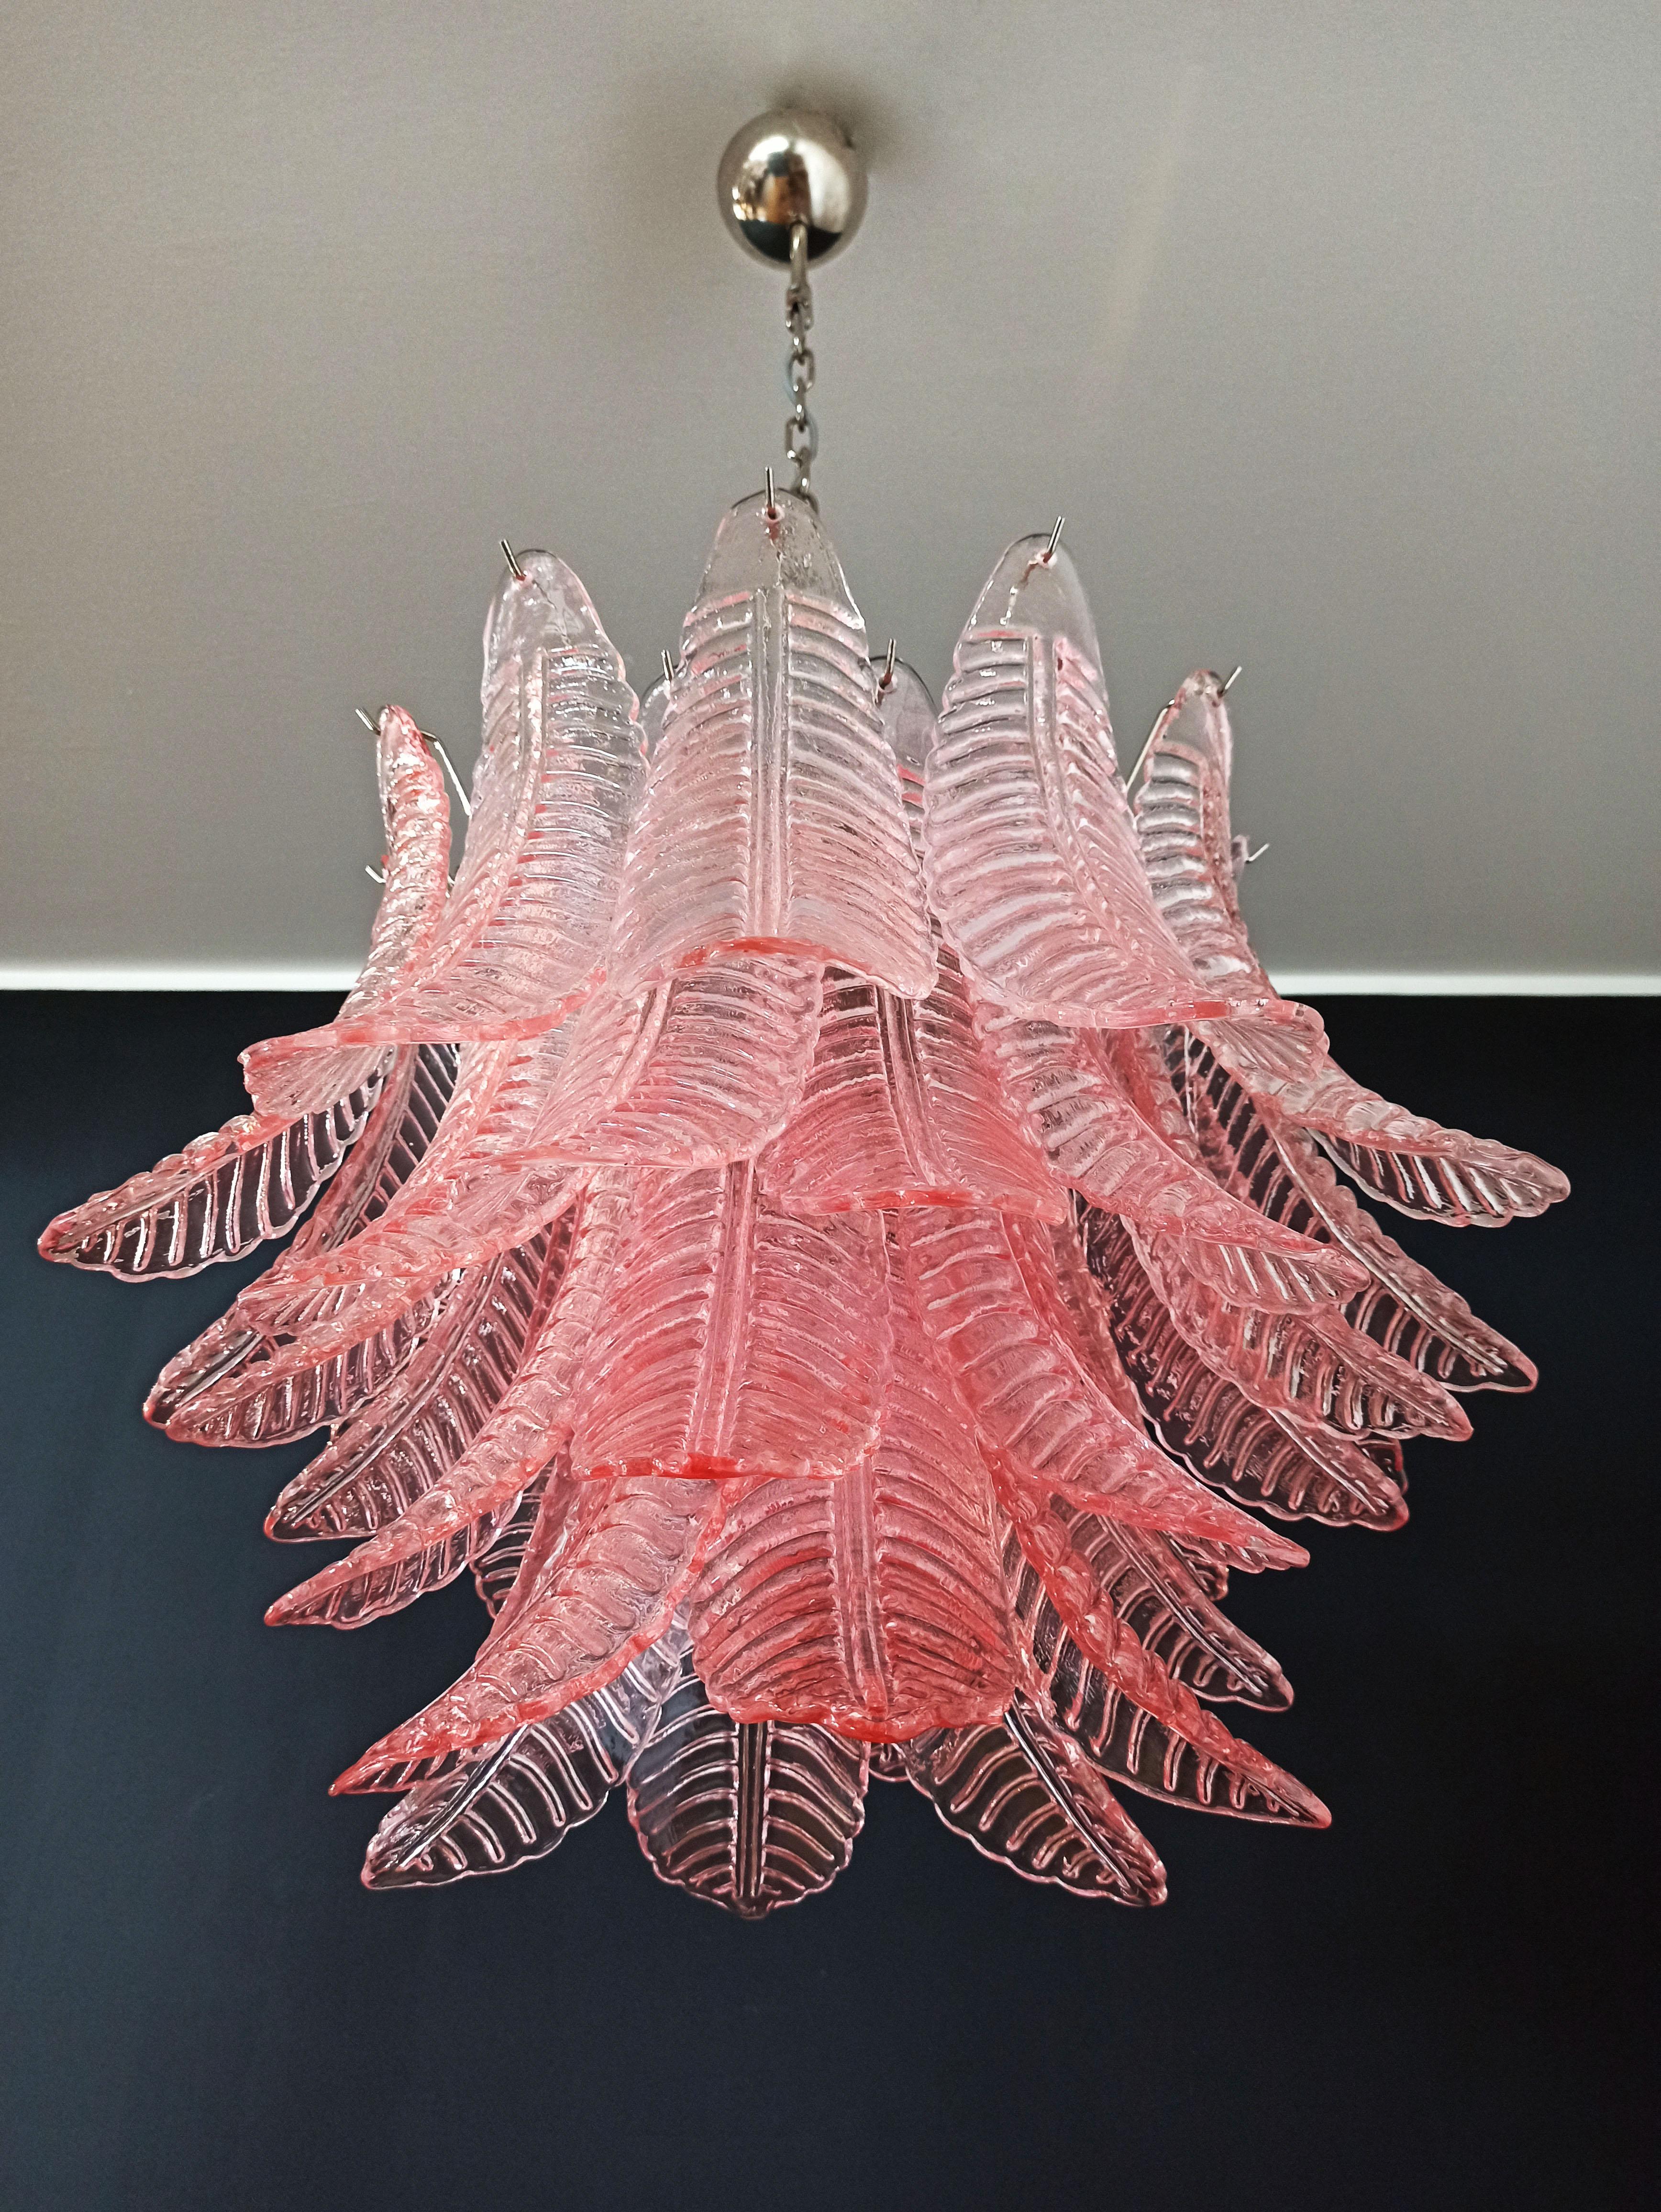 Beautiful Italian Murano chandelier composed of 36 splendid pink glasses that give a very elegant look. The glasses of this chandelier are real works of art.
Period: 1990s
Dimensions: 47.25 inches (120 cm) height with chain; 21.65 inches (55 cm)